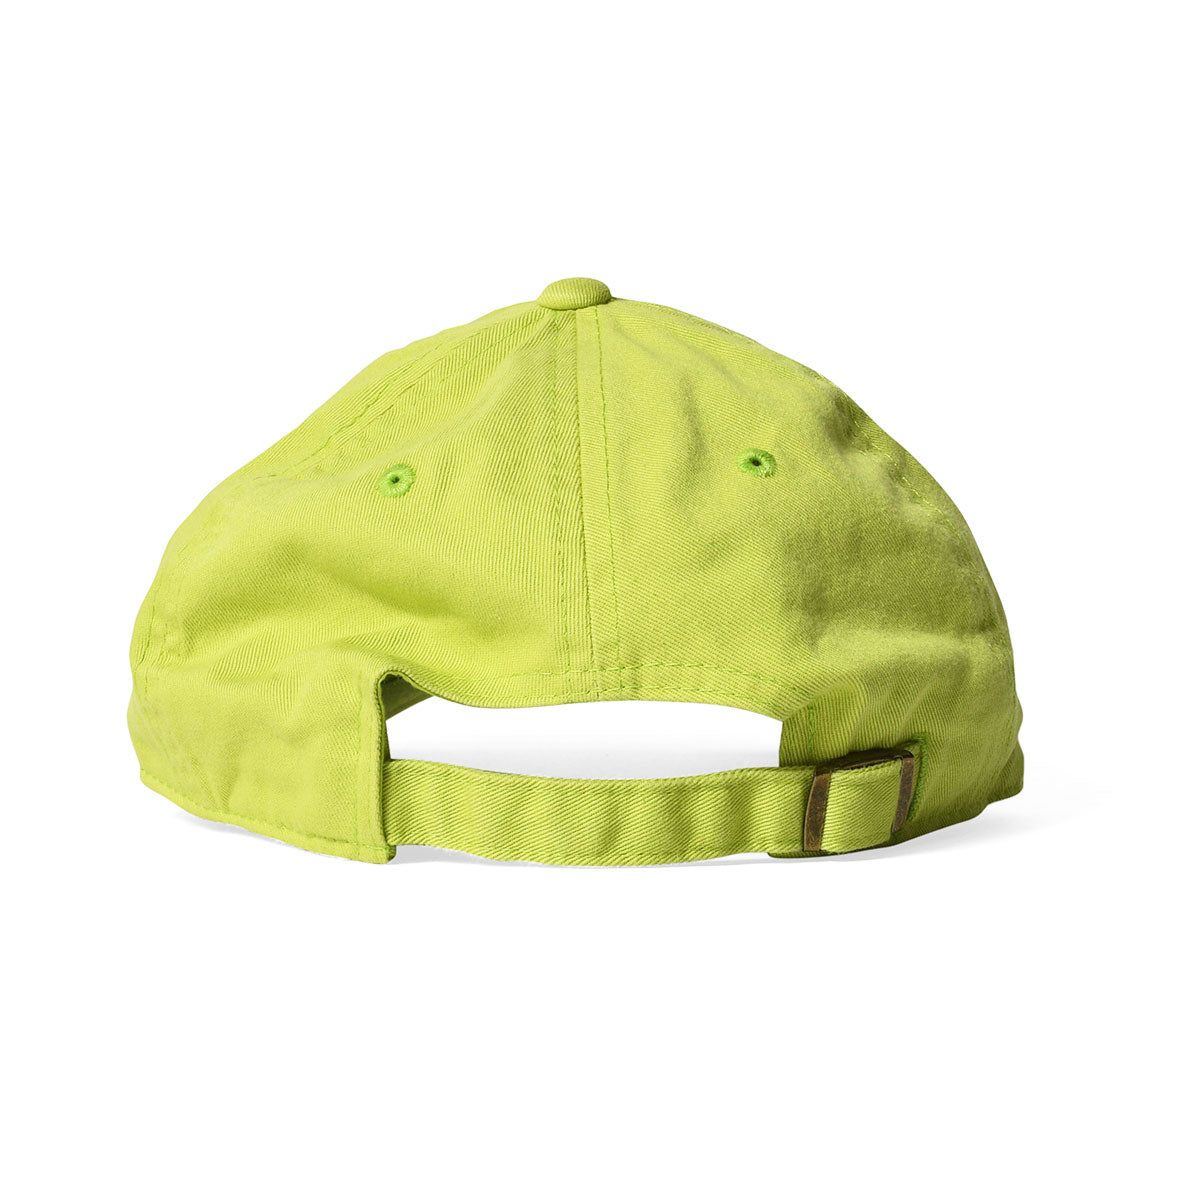 AMERICAN NEEDLE Foodie Slouch - Avocado【44950AAVOC】